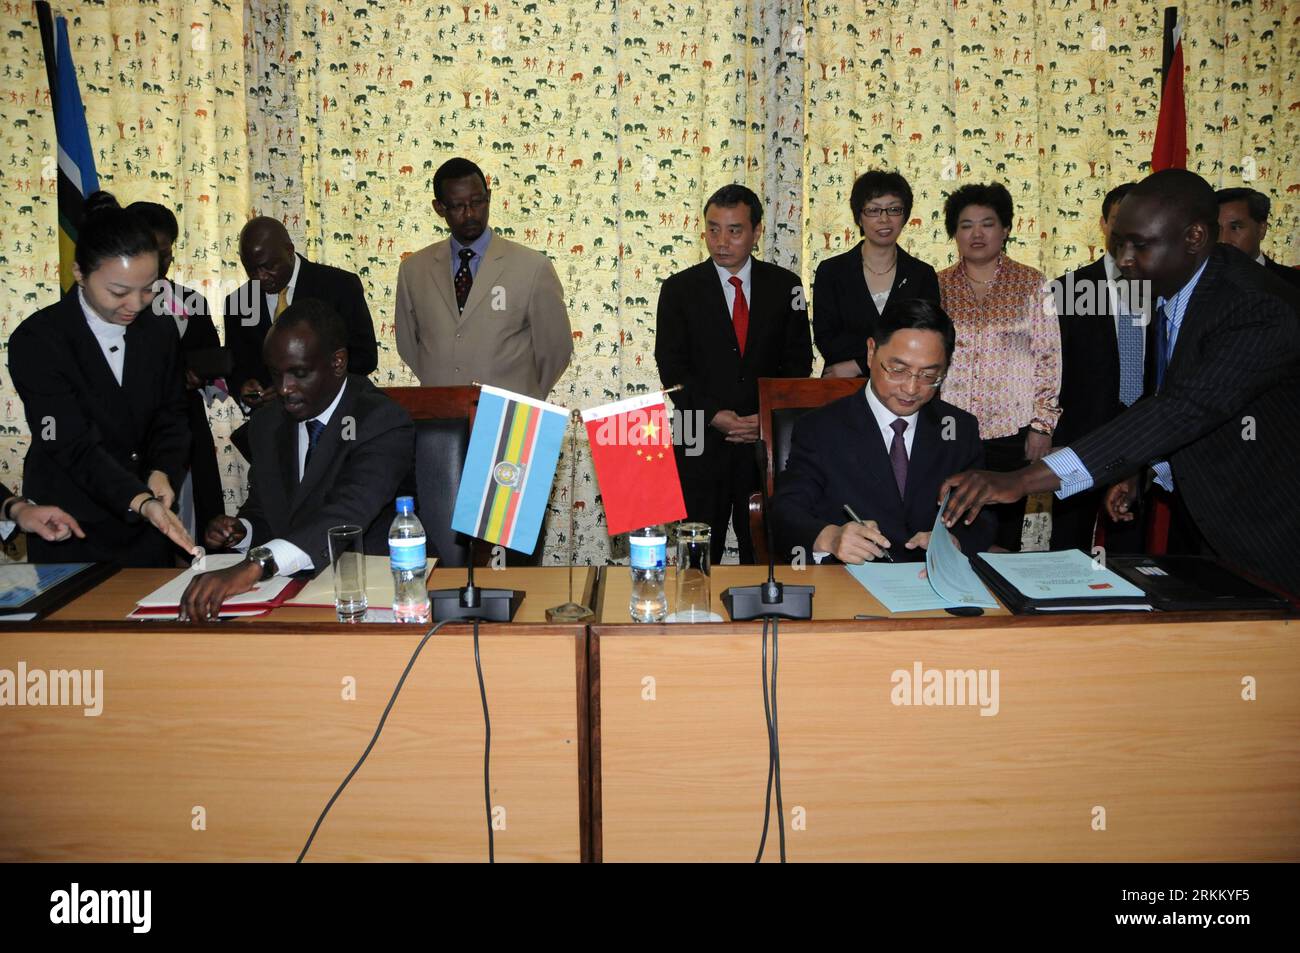 Bildnummer: 56290782  Datum: 17.11.2011  Copyright: imago/Xinhua (111117) -- ARUSHA (TANZANIA), Nov. 17, 2011 (Xinhua) -- Jiang Yaoping (2nd R, front), Chinese vice minister of Commerce, and Richard Sezibera (2nd L, front), Secretary General of the East African Community (EAC), sign a Framework Agreement on Economic and Trade Cooperation at EAC headquarters in Arusha, Tanzania, on Nov. 17, 2011. The agreement, first of its kind in sub-Sahara region, is aimed to further promote the economic and trade relations between China and EAC. (Xinhua/Chen Jing) TANZANIA-ARUSHA-CHINA-EAC-COOPERATION PUBLI Stock Photo